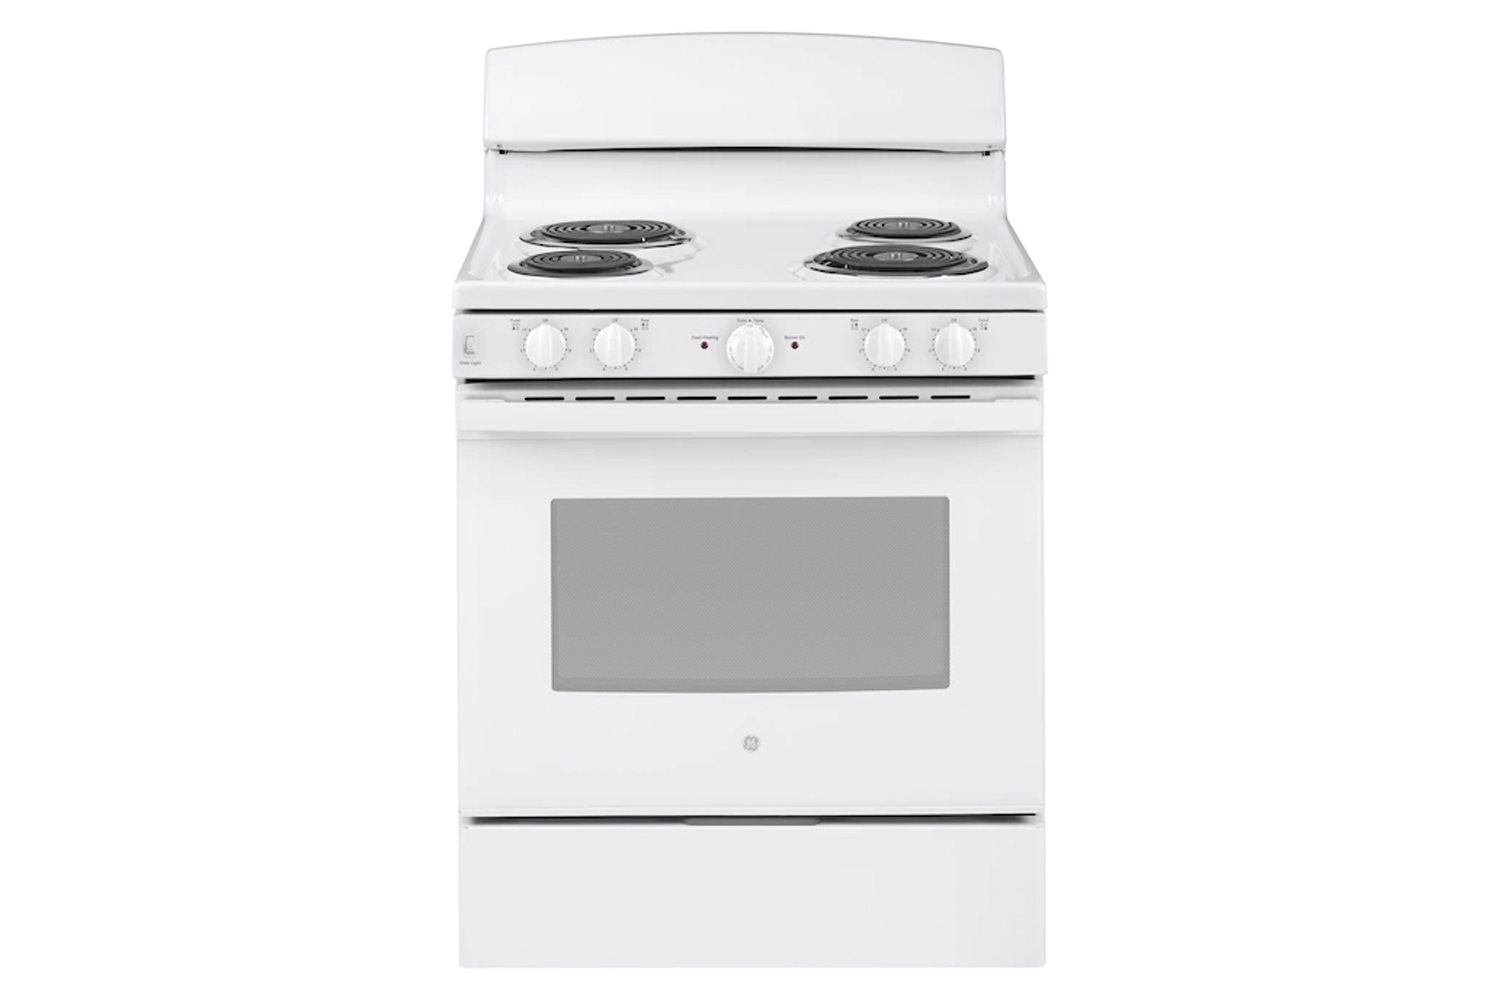 the ge 30 inch freestanding electric range is \$899 at lowes. 12